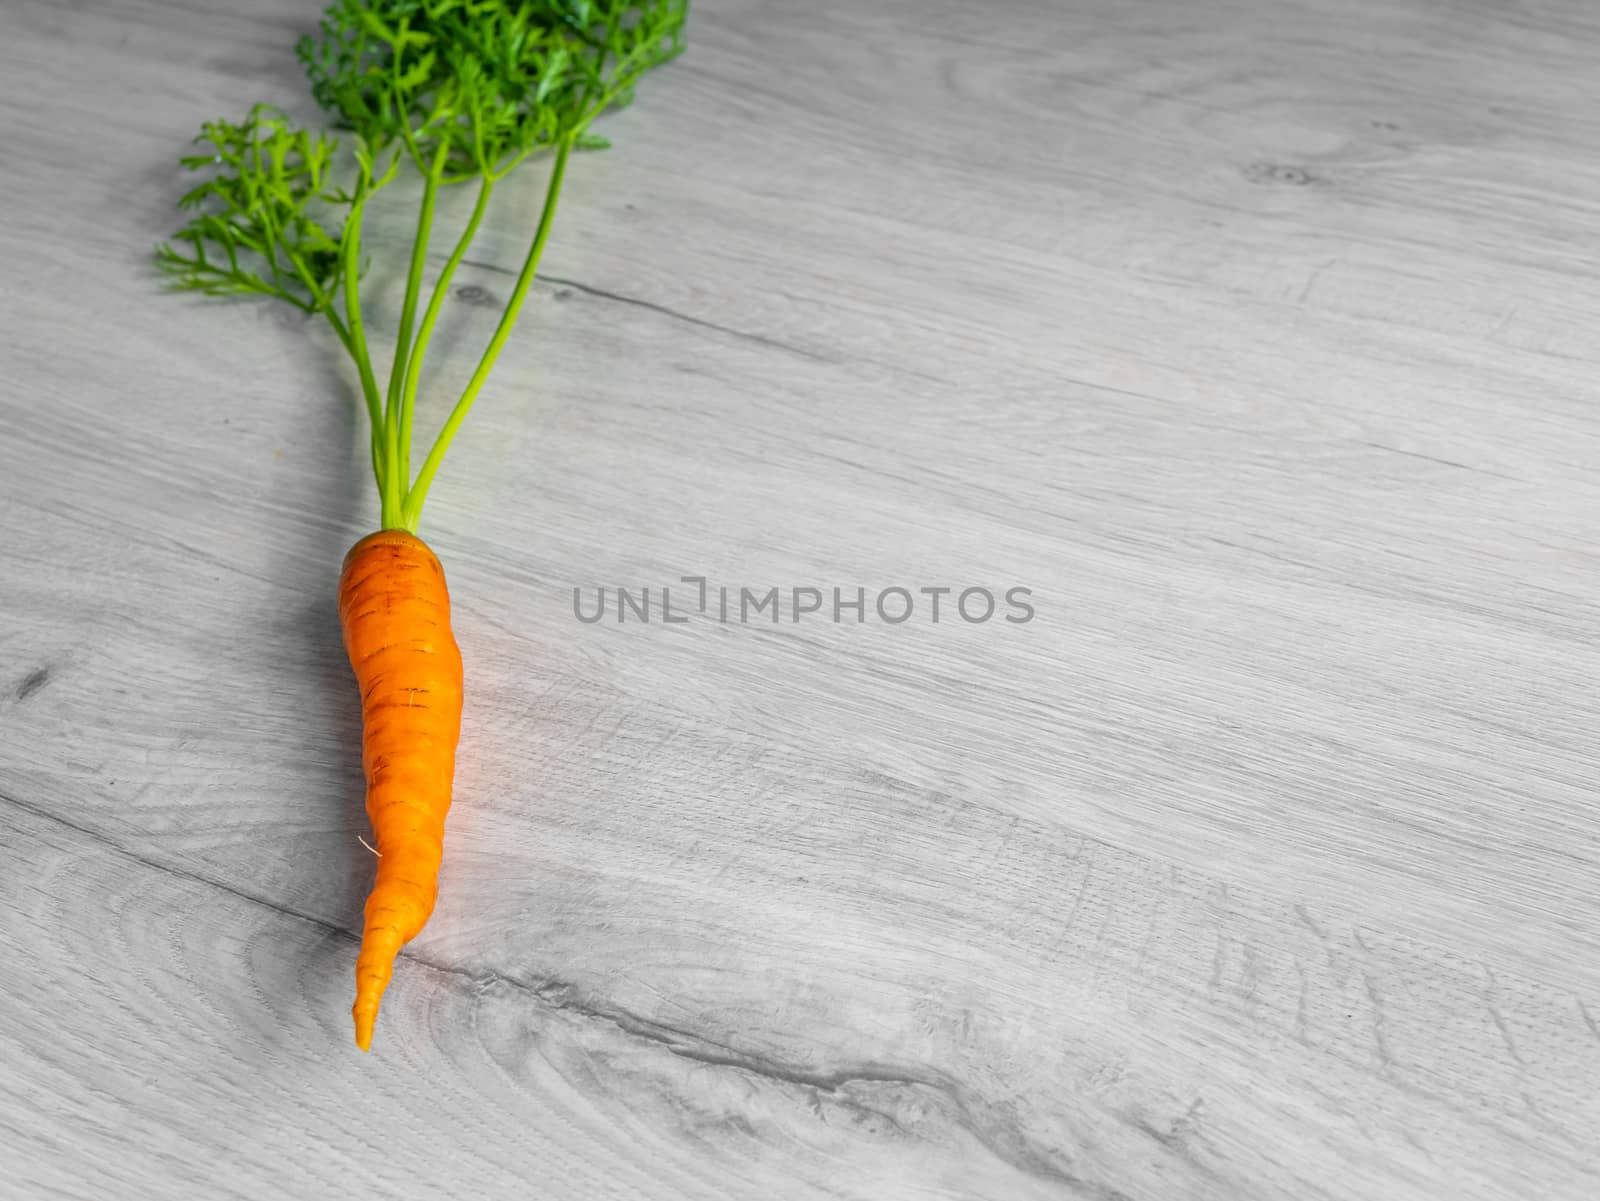 Orange natural carrot with a fluffy long tail. On a light background.